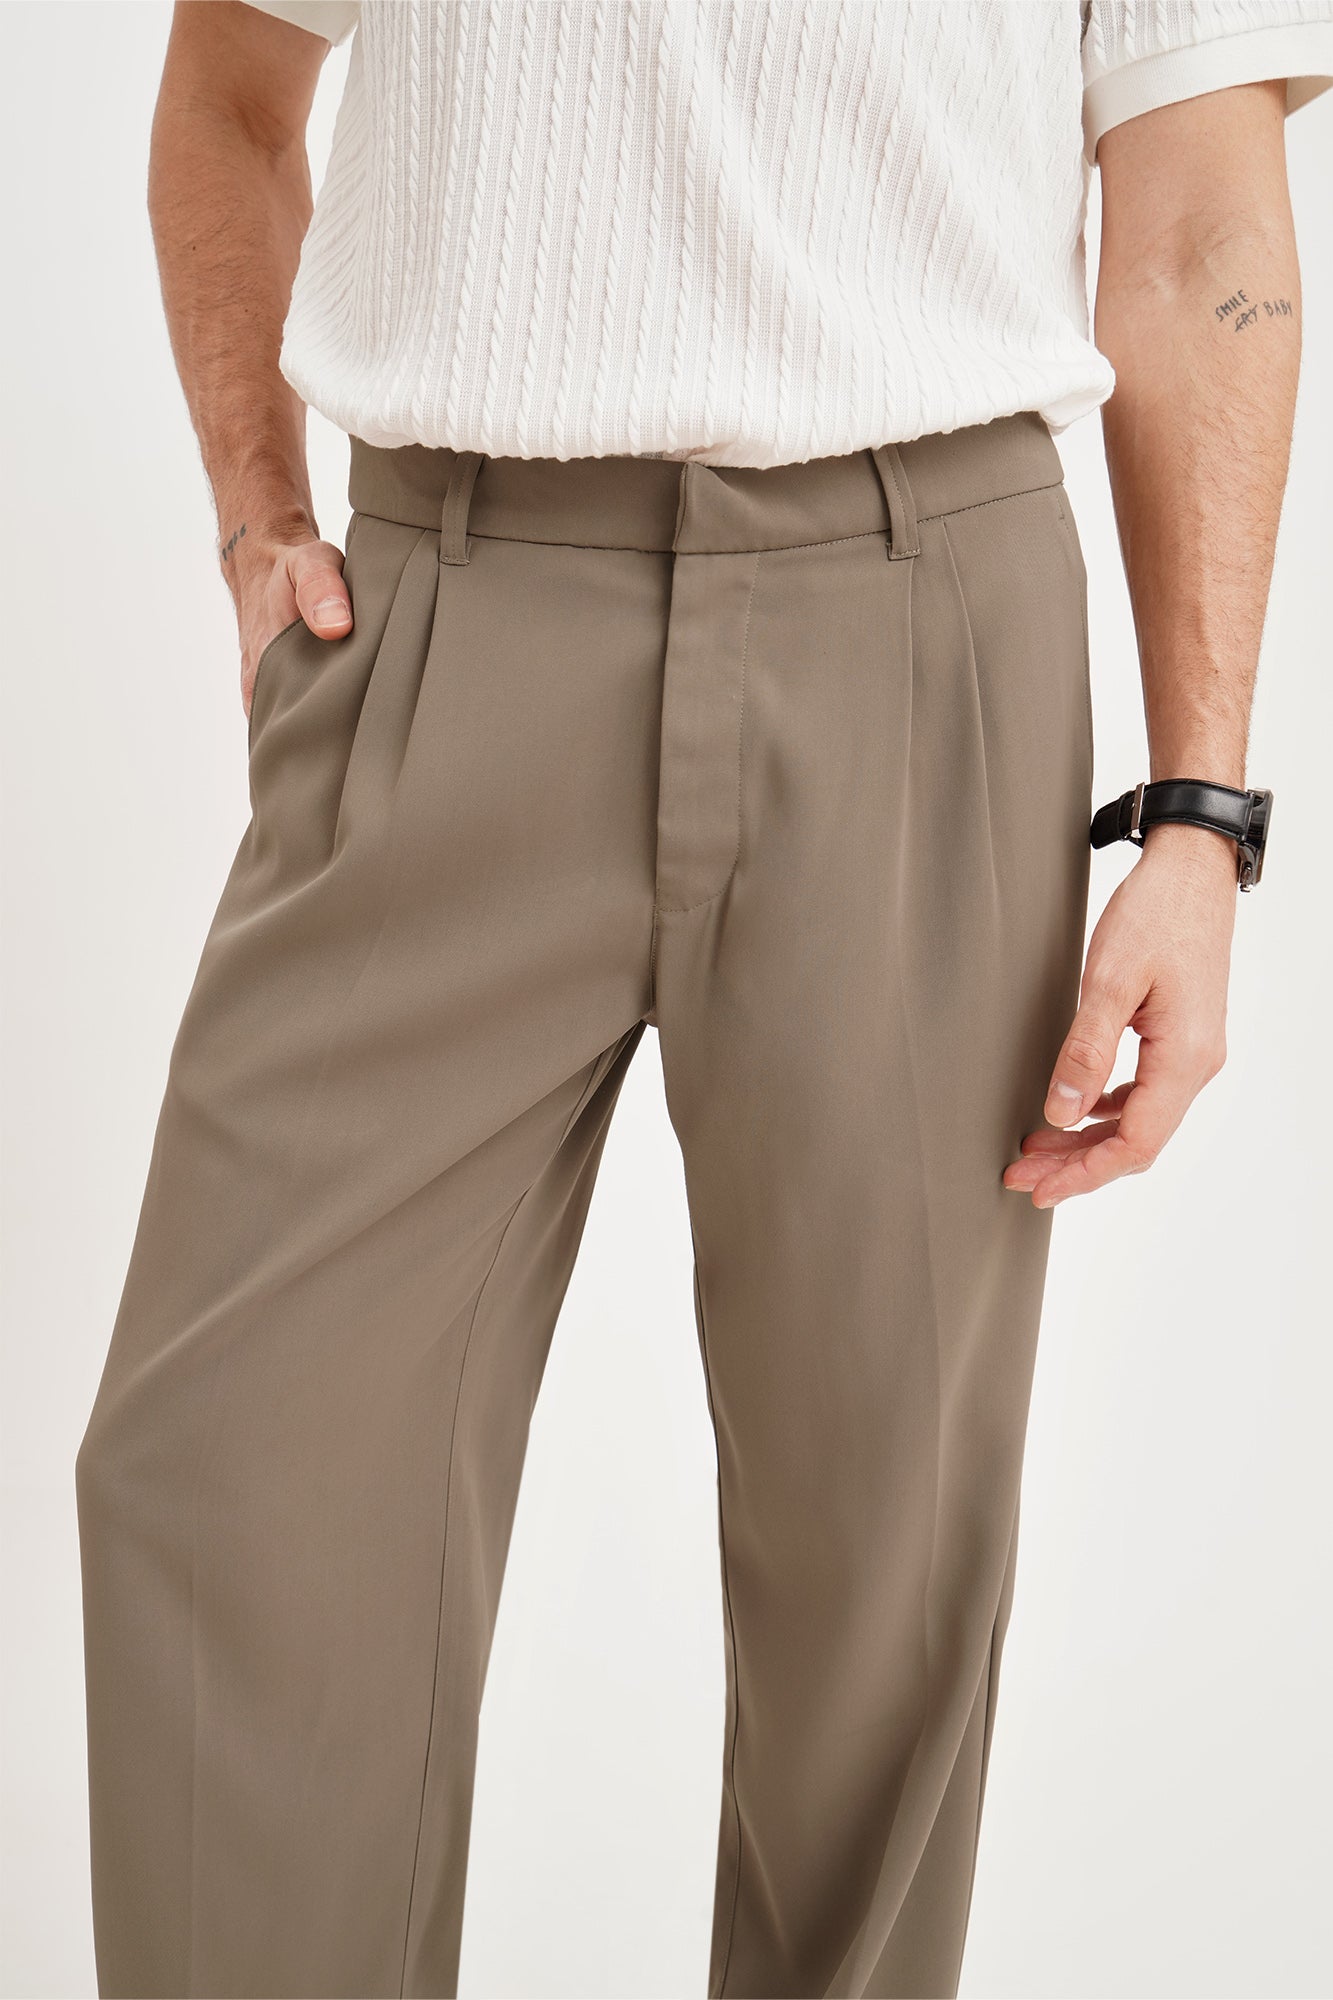 10 Styling Tips To Look Best In Cargo Pants & How to Style For Men